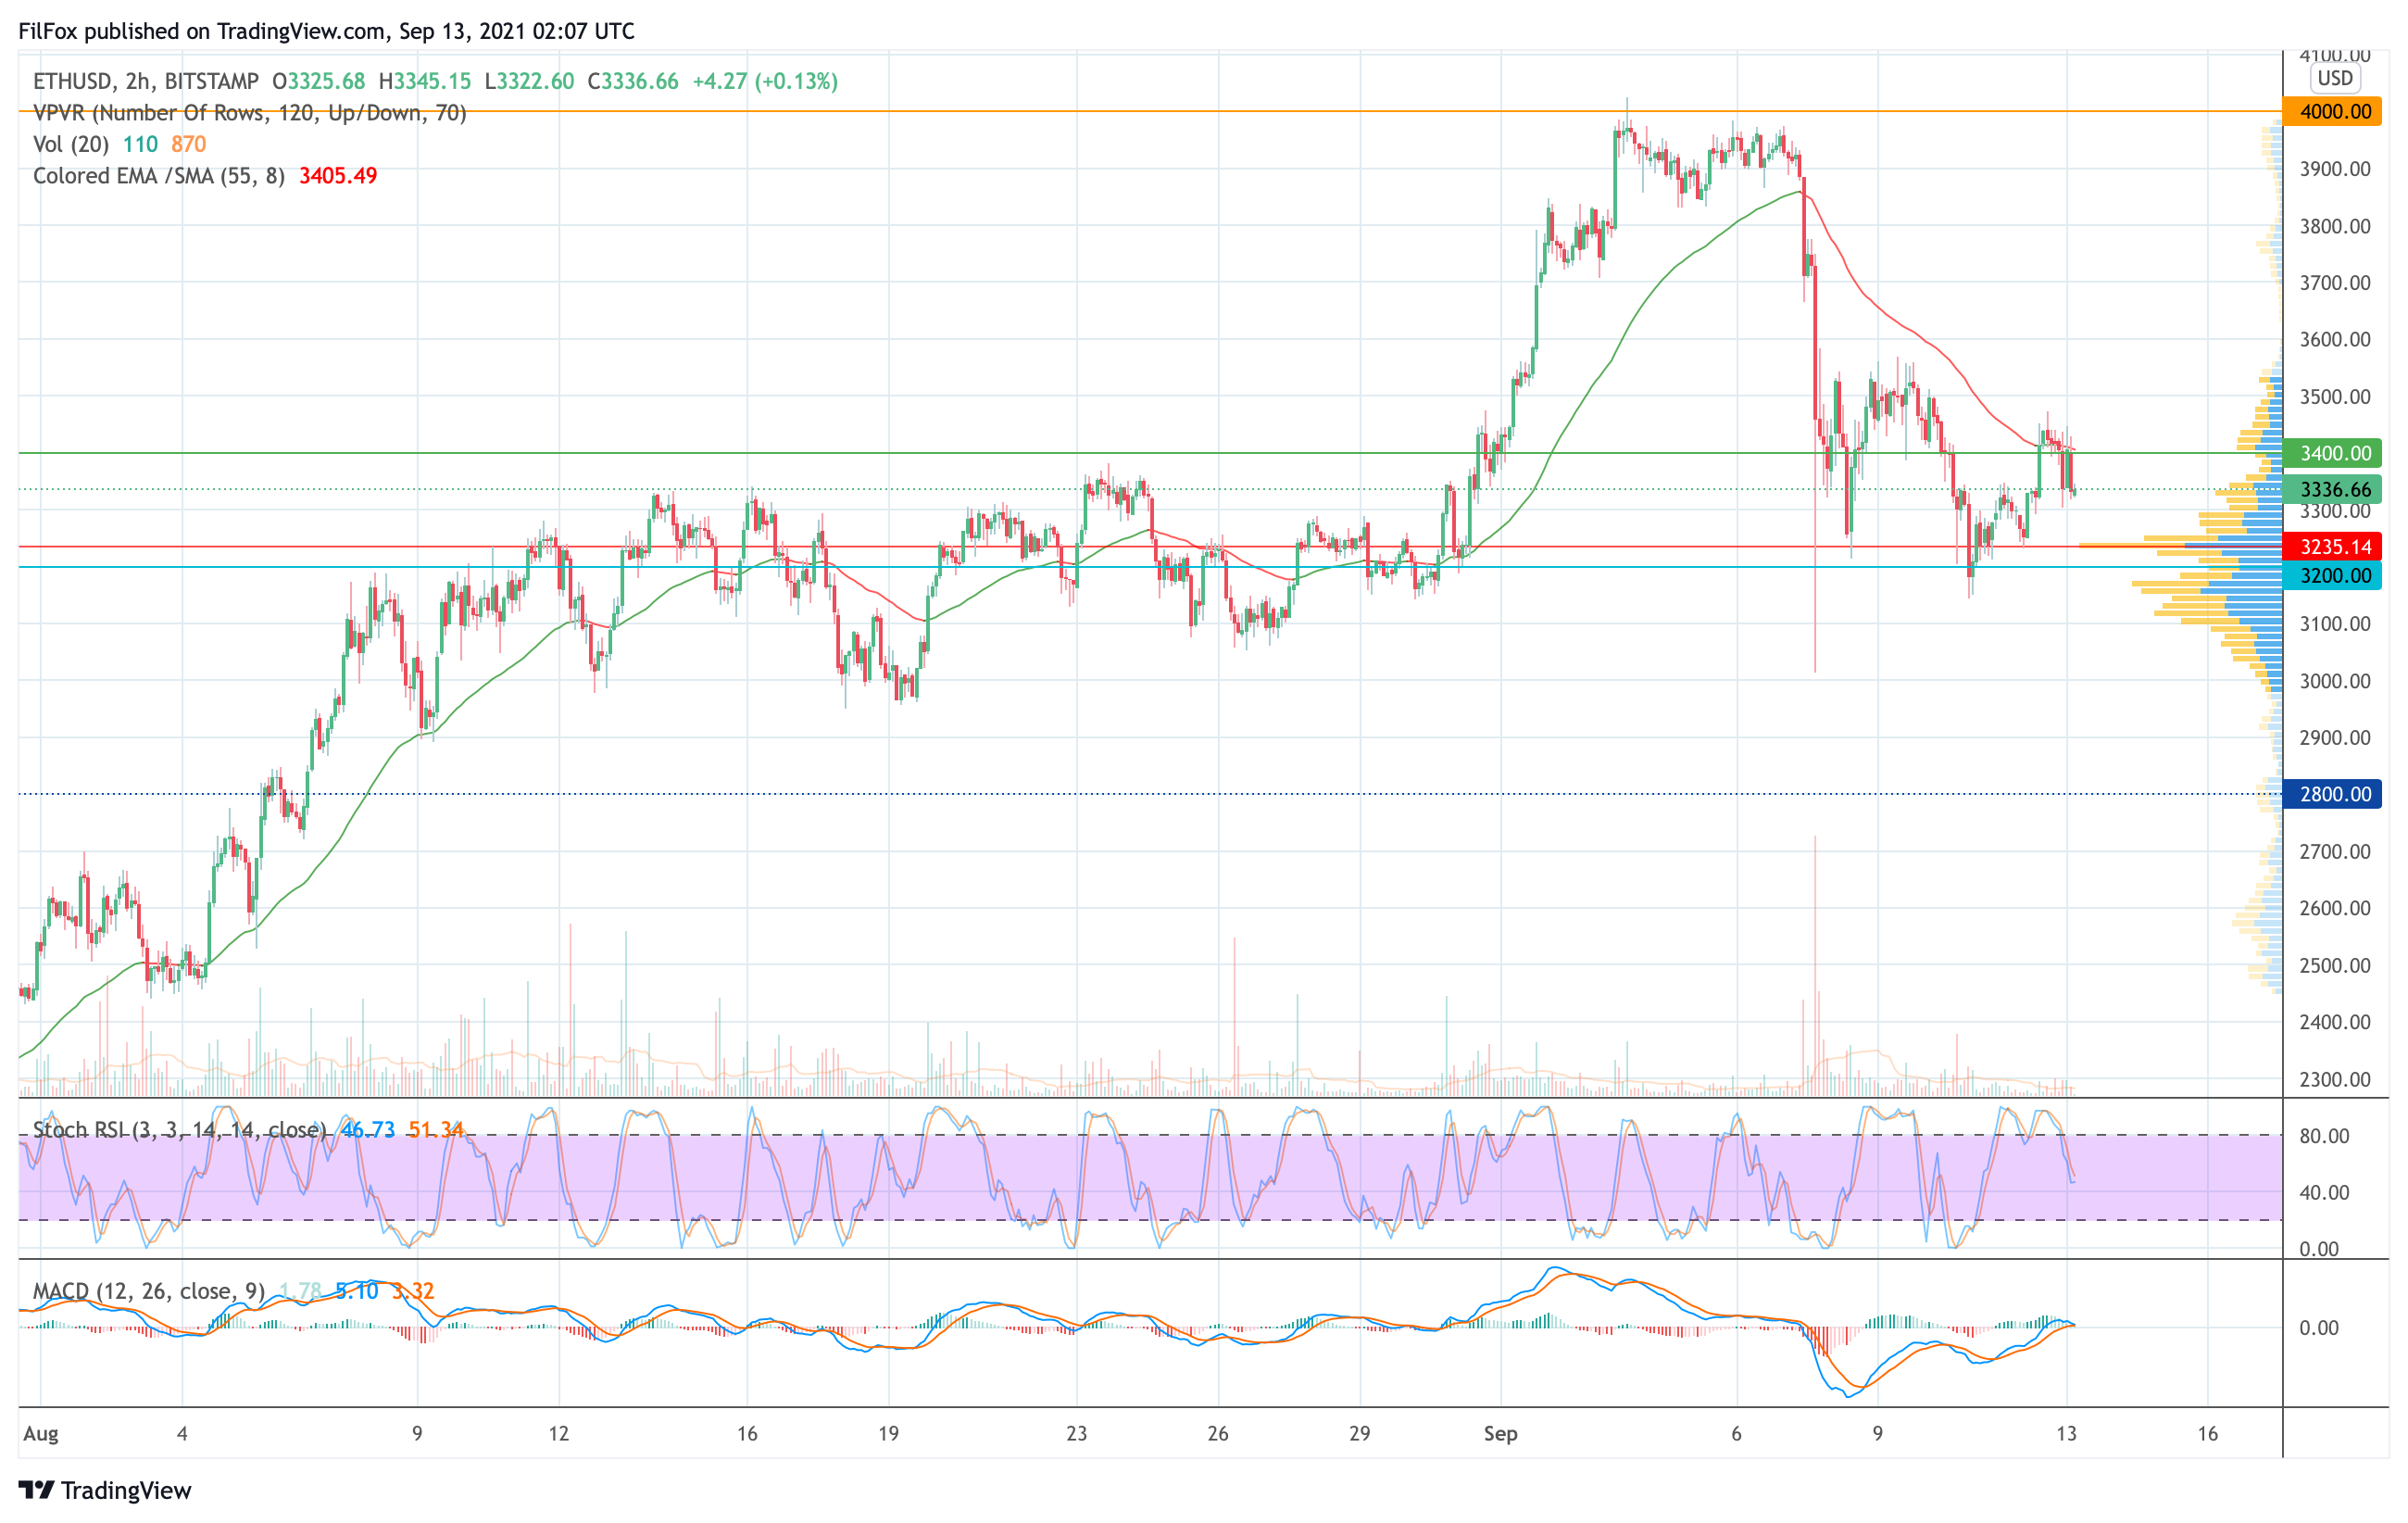 Analysis of the prices of Bitcoin, Ethereum, XRP for 09/13/2021